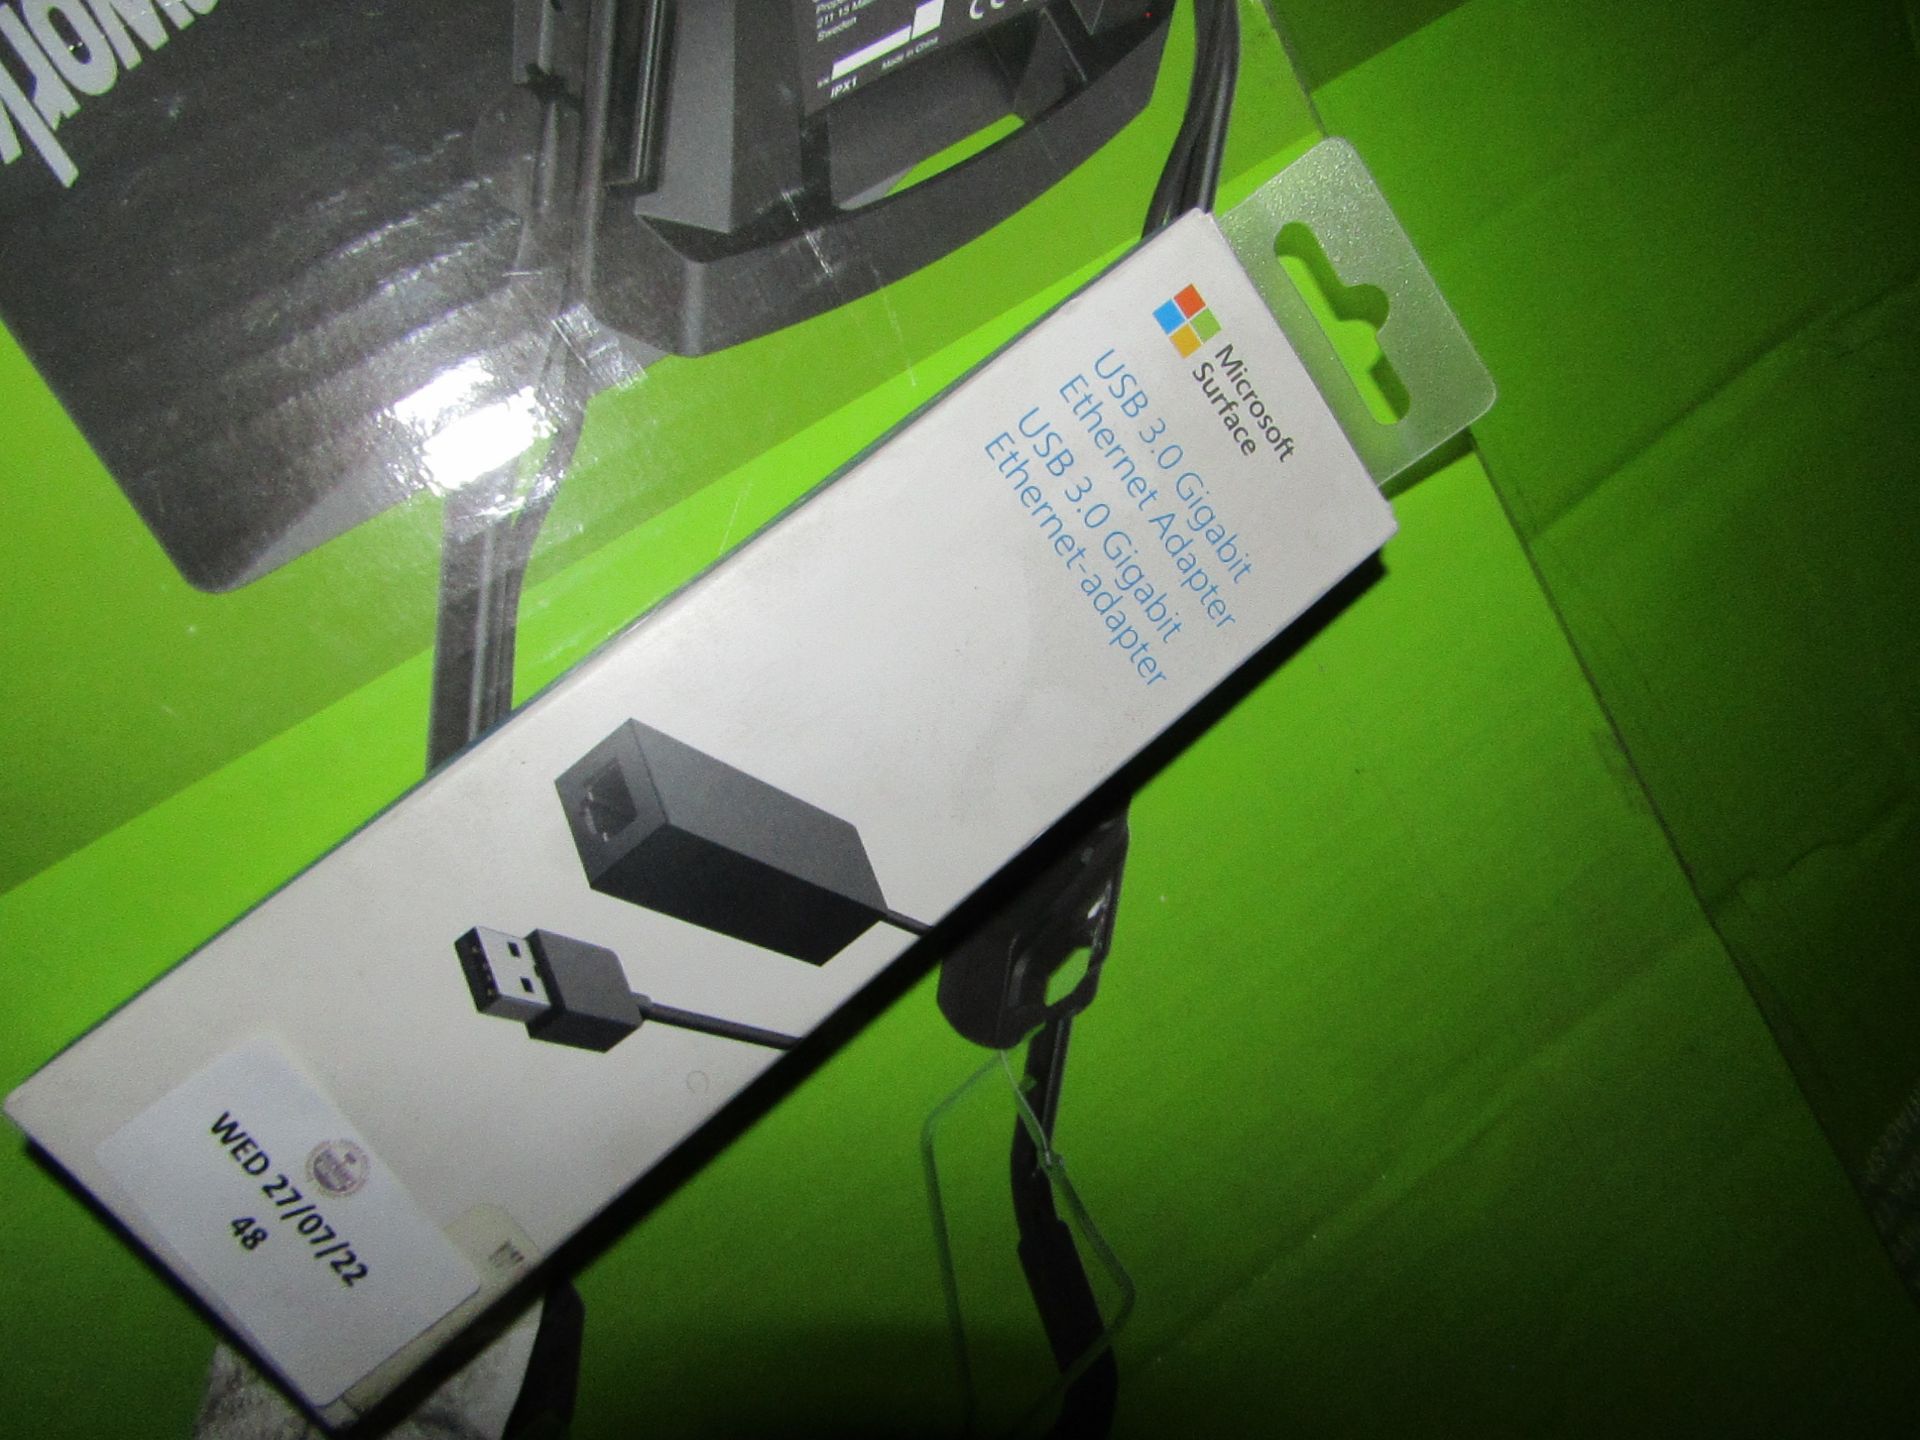 Microsoft - USB 3.0 Gigabit Ethernet Adapter - Unchecked & Boxed. RRP £27